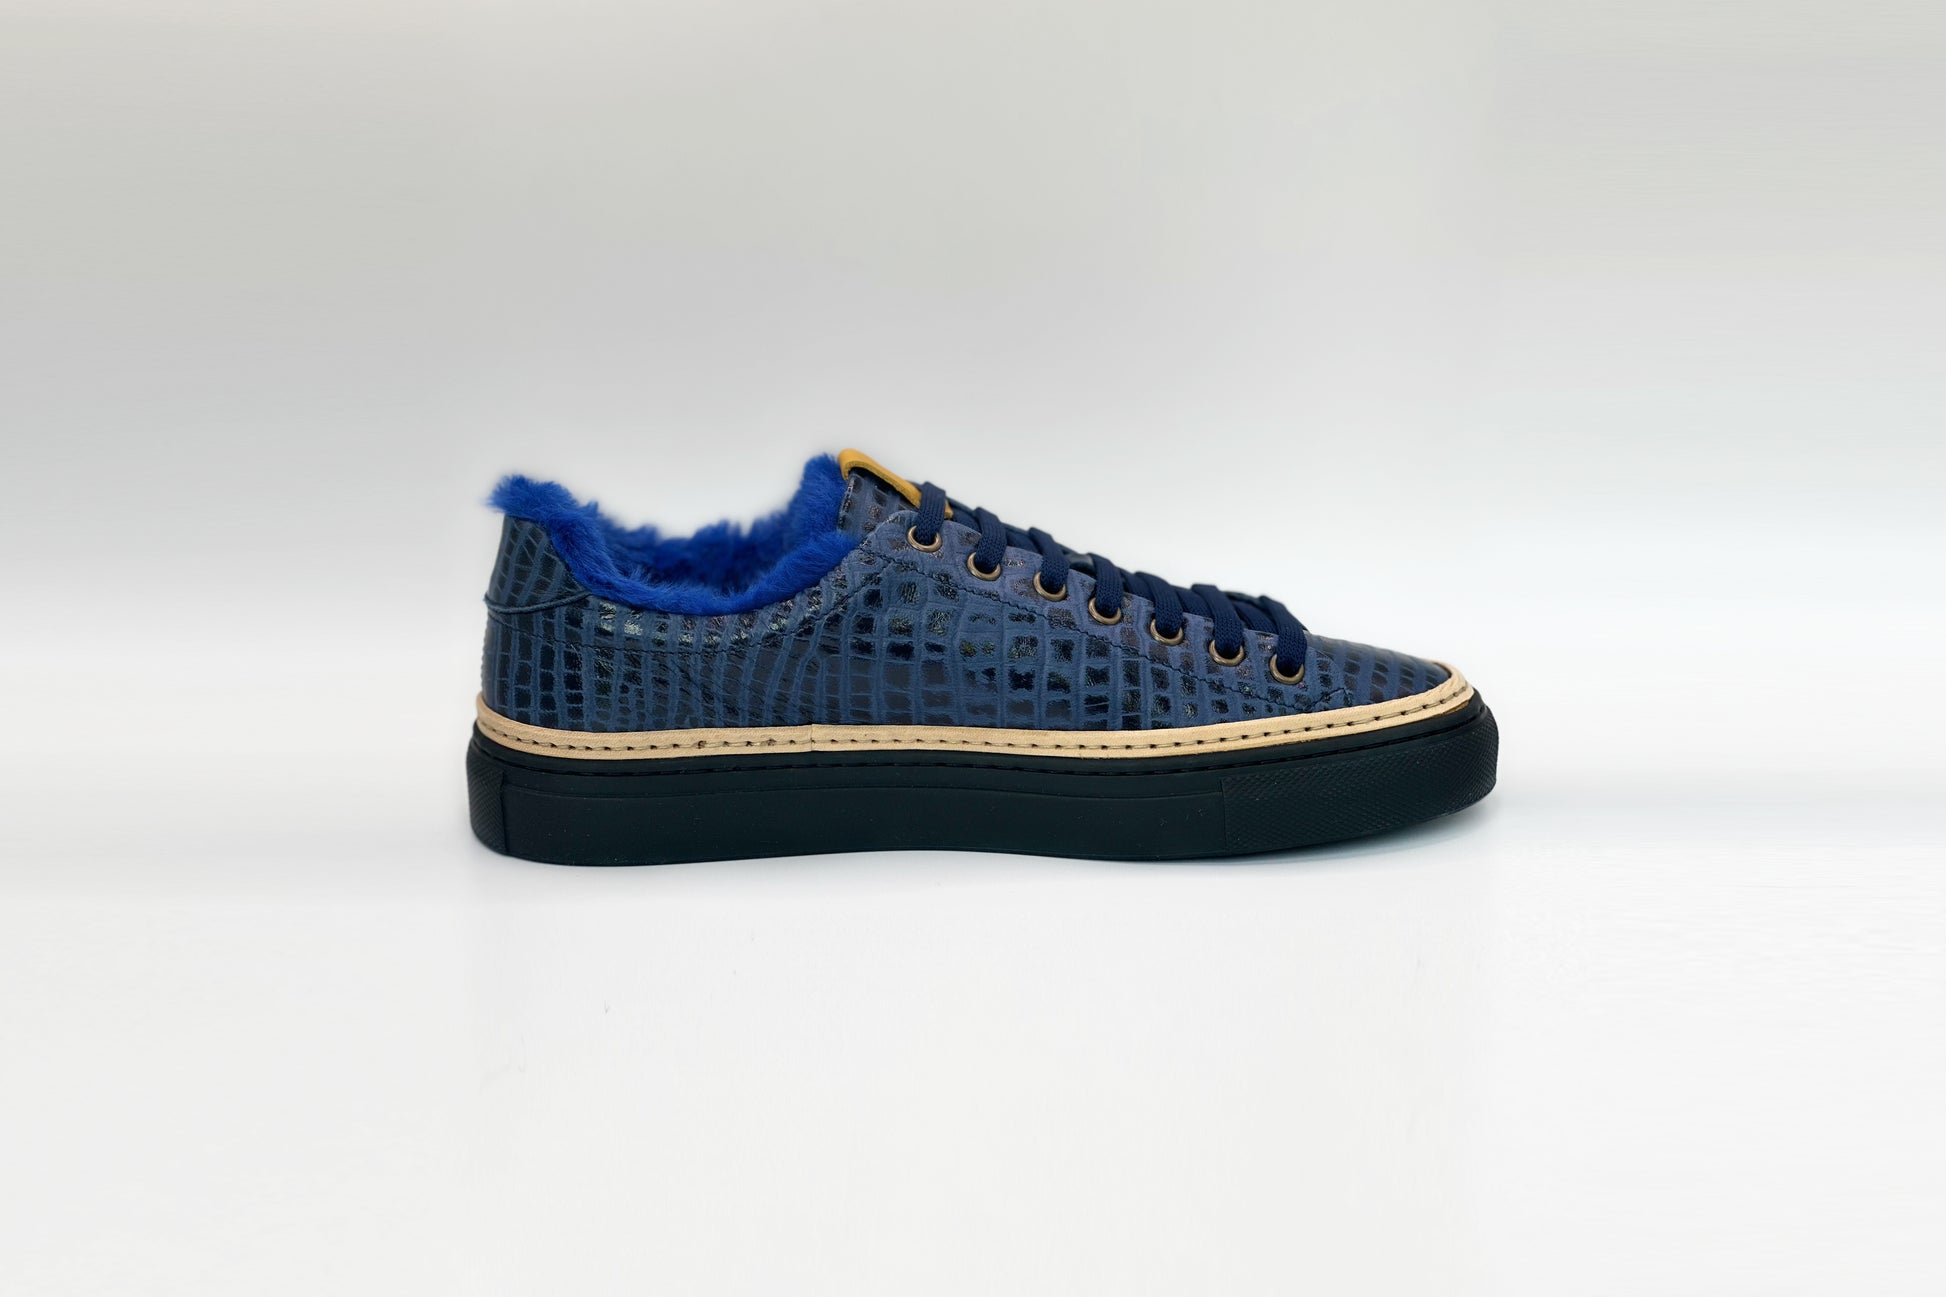 Men’s Navy Blue Leather Sneakers with Blue Eco-Fur